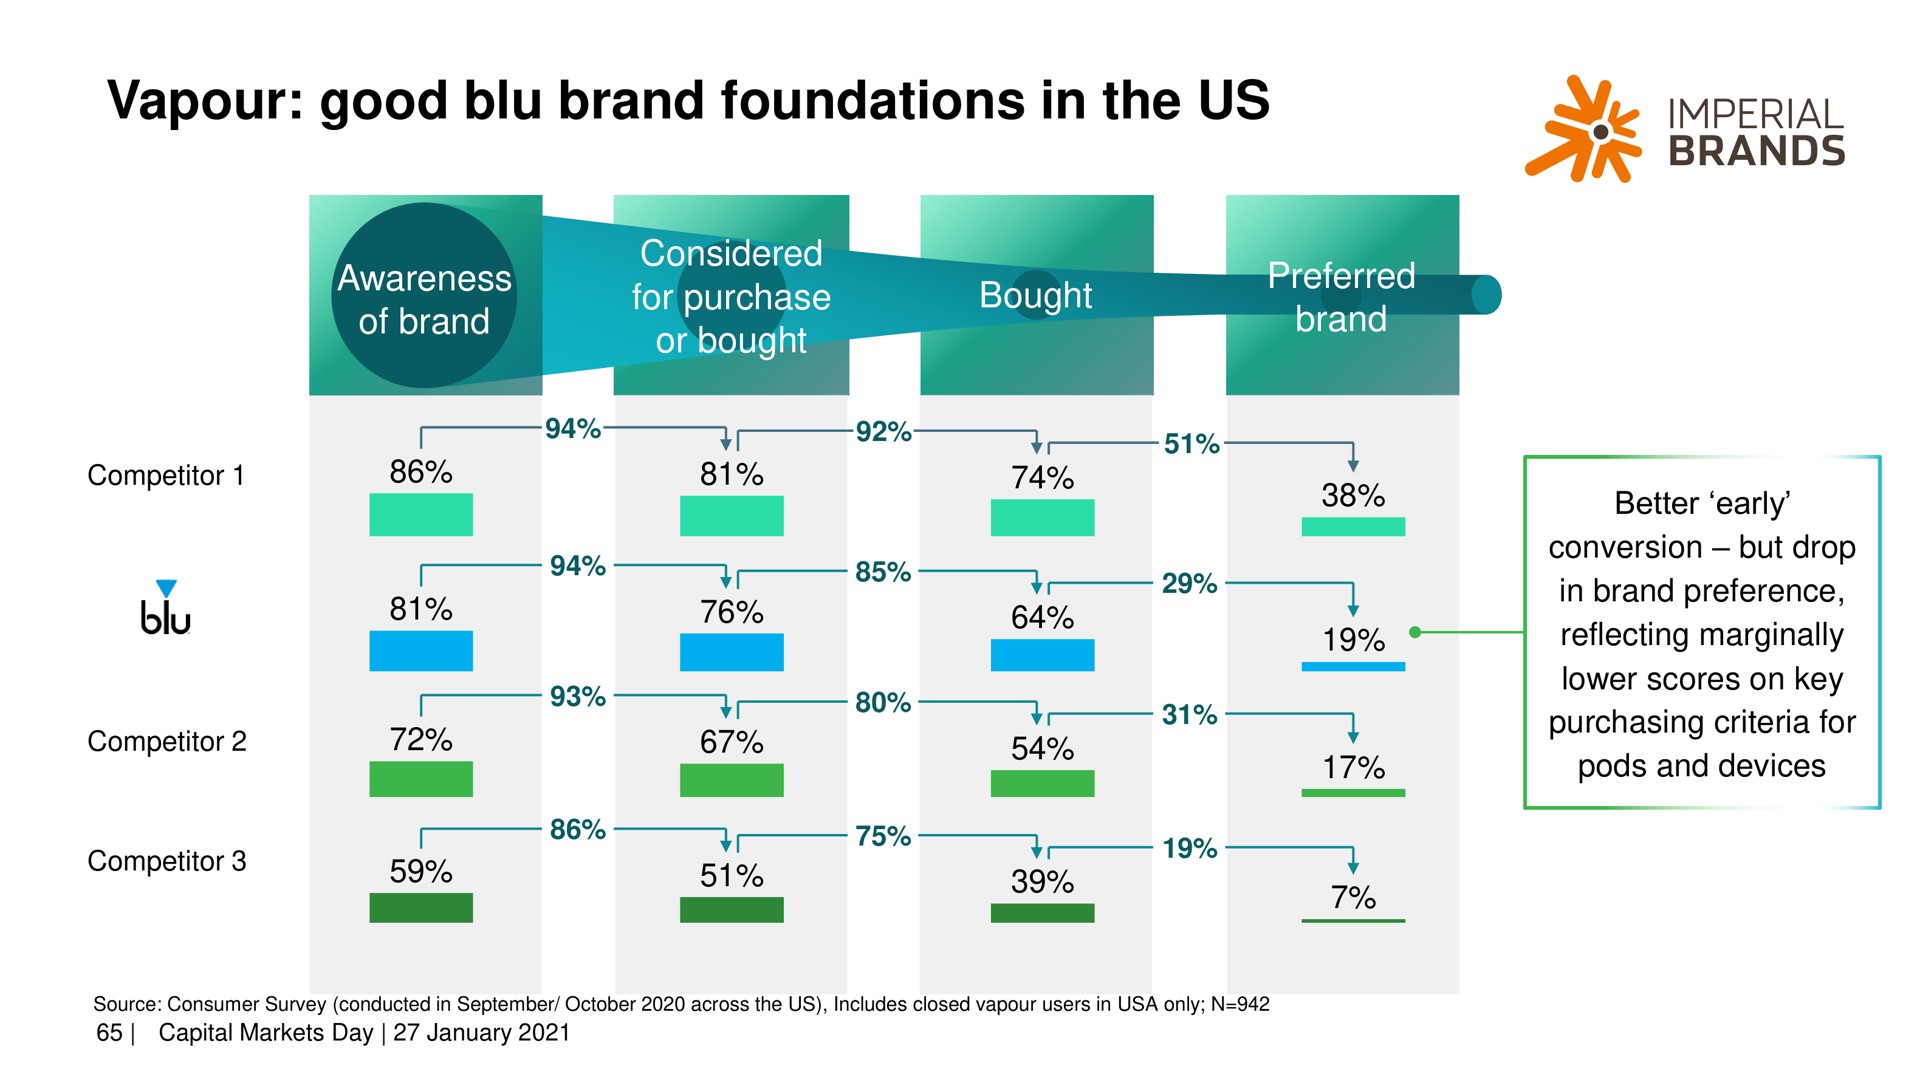 good brand foundations in the us me imperial brands a better early | Imperial Brands